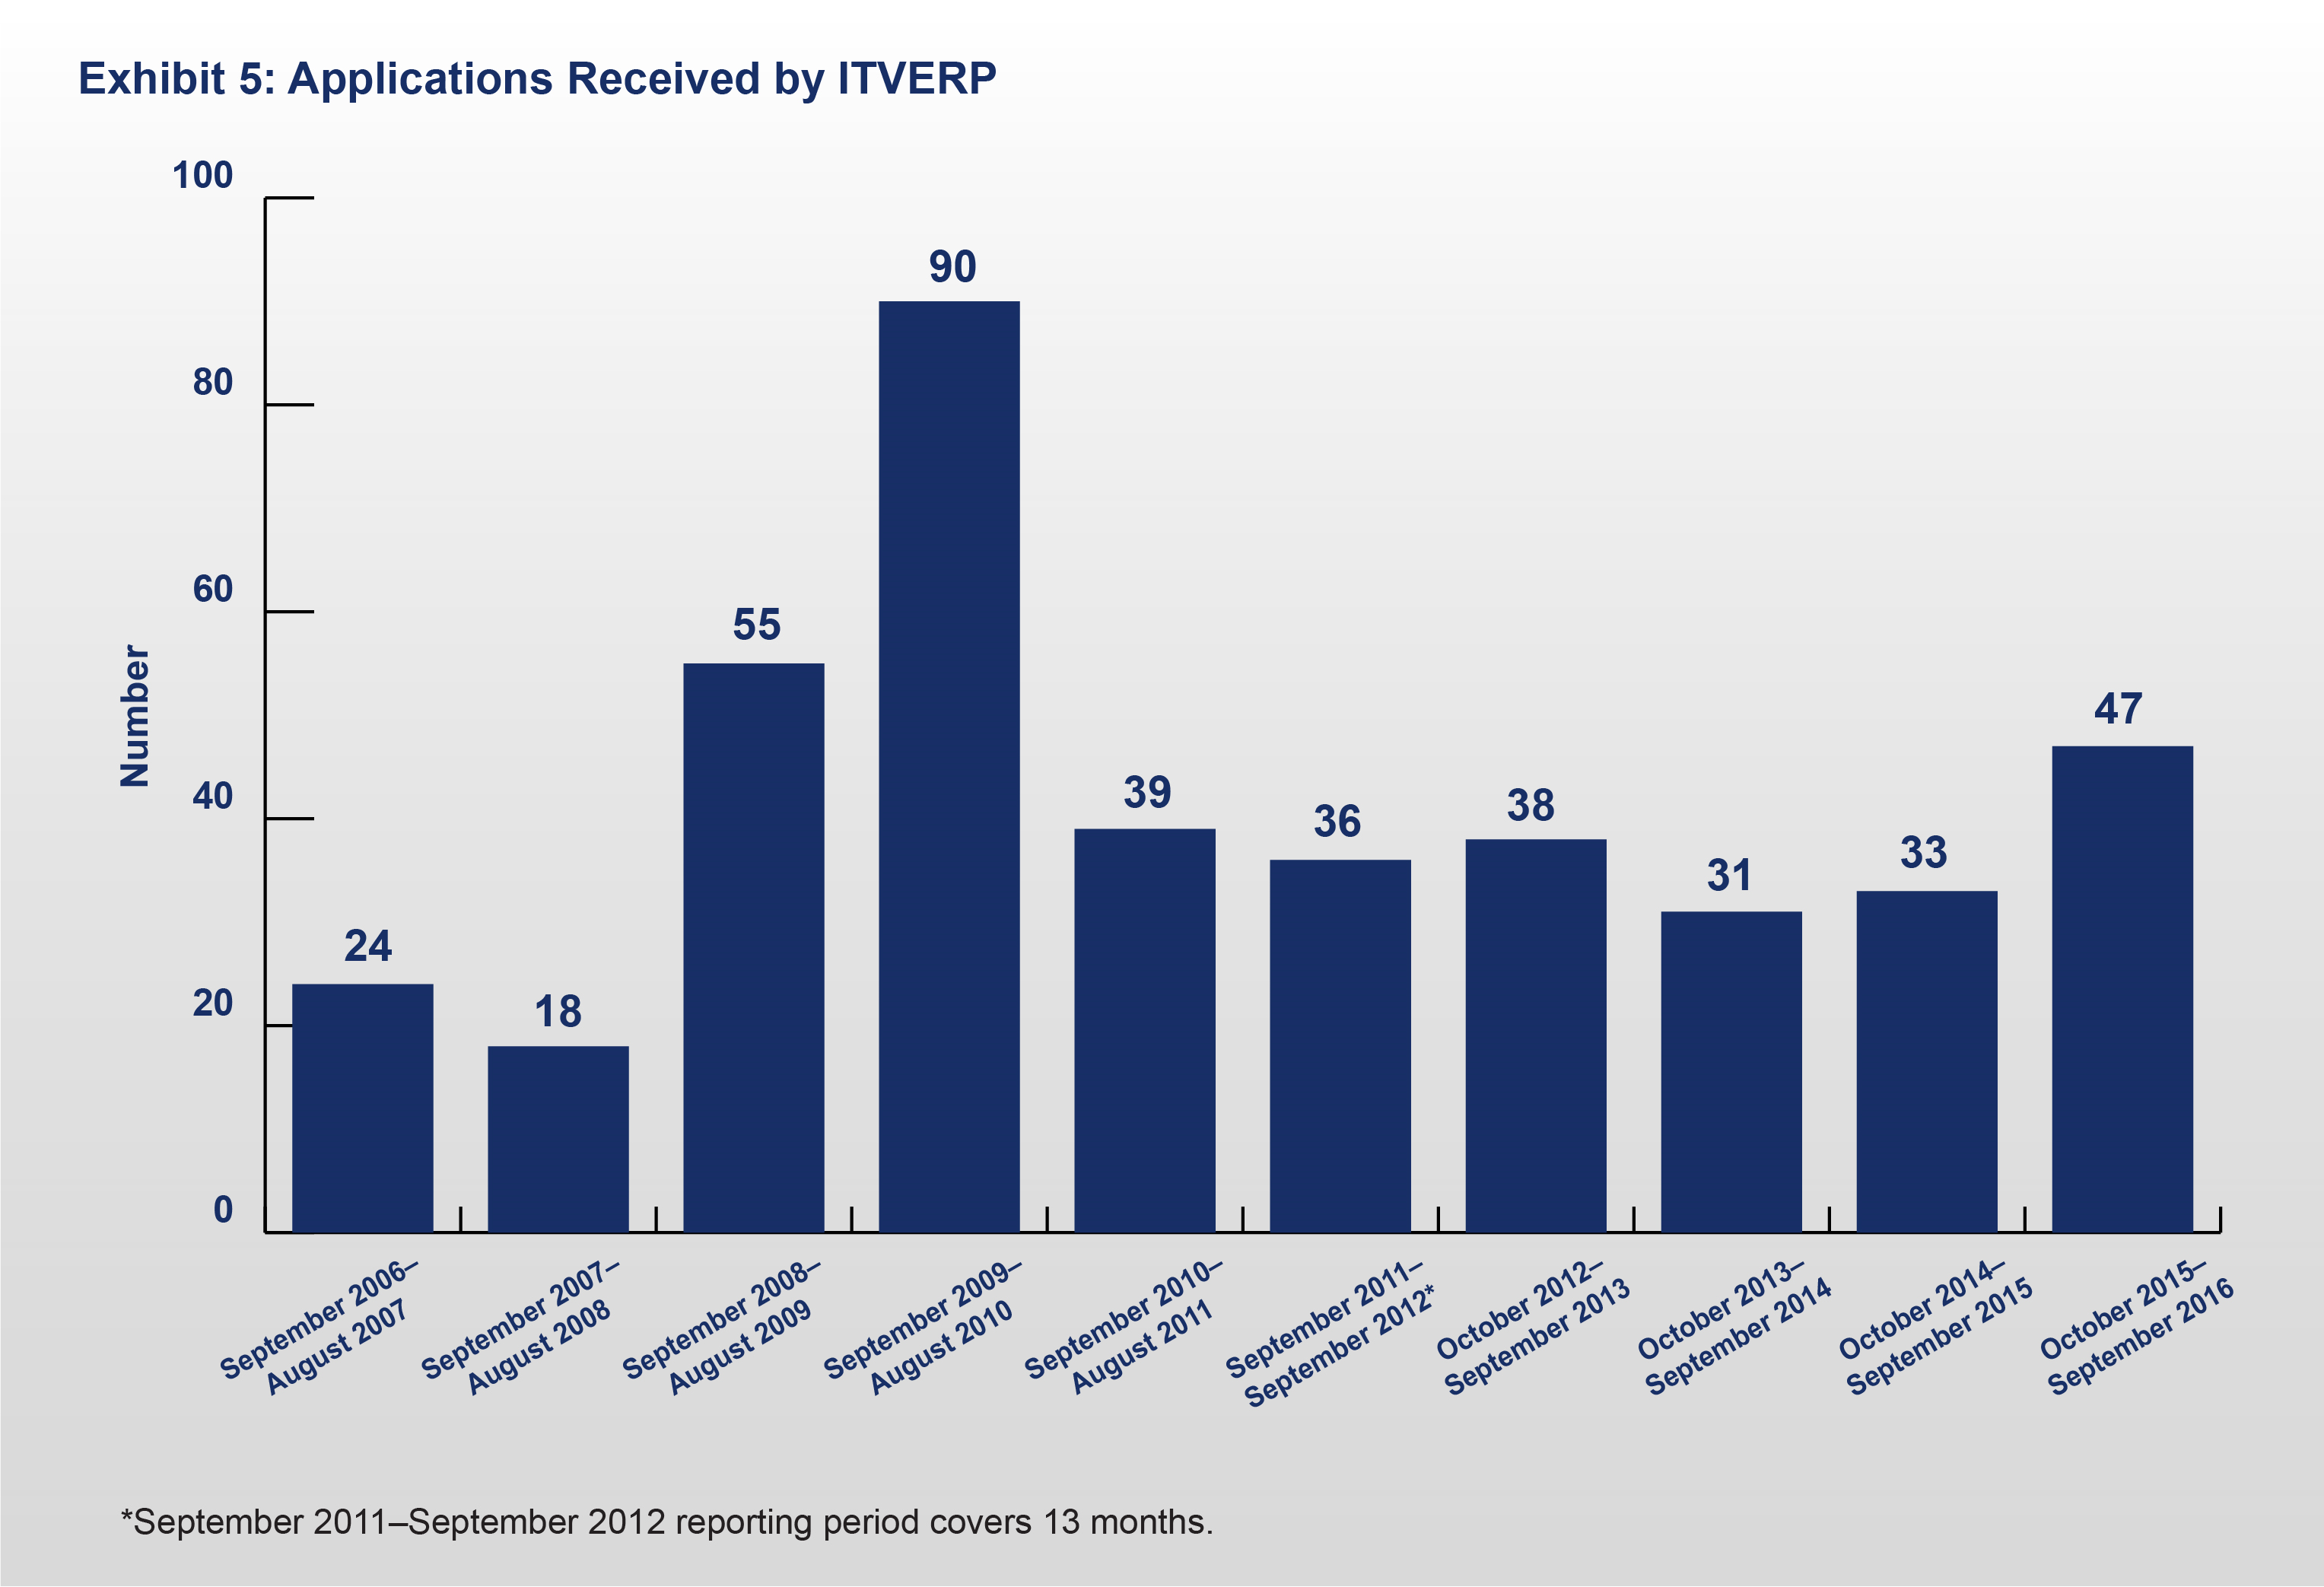 Exhibit 5: Applications Received by ITVERP (As of September 2016)